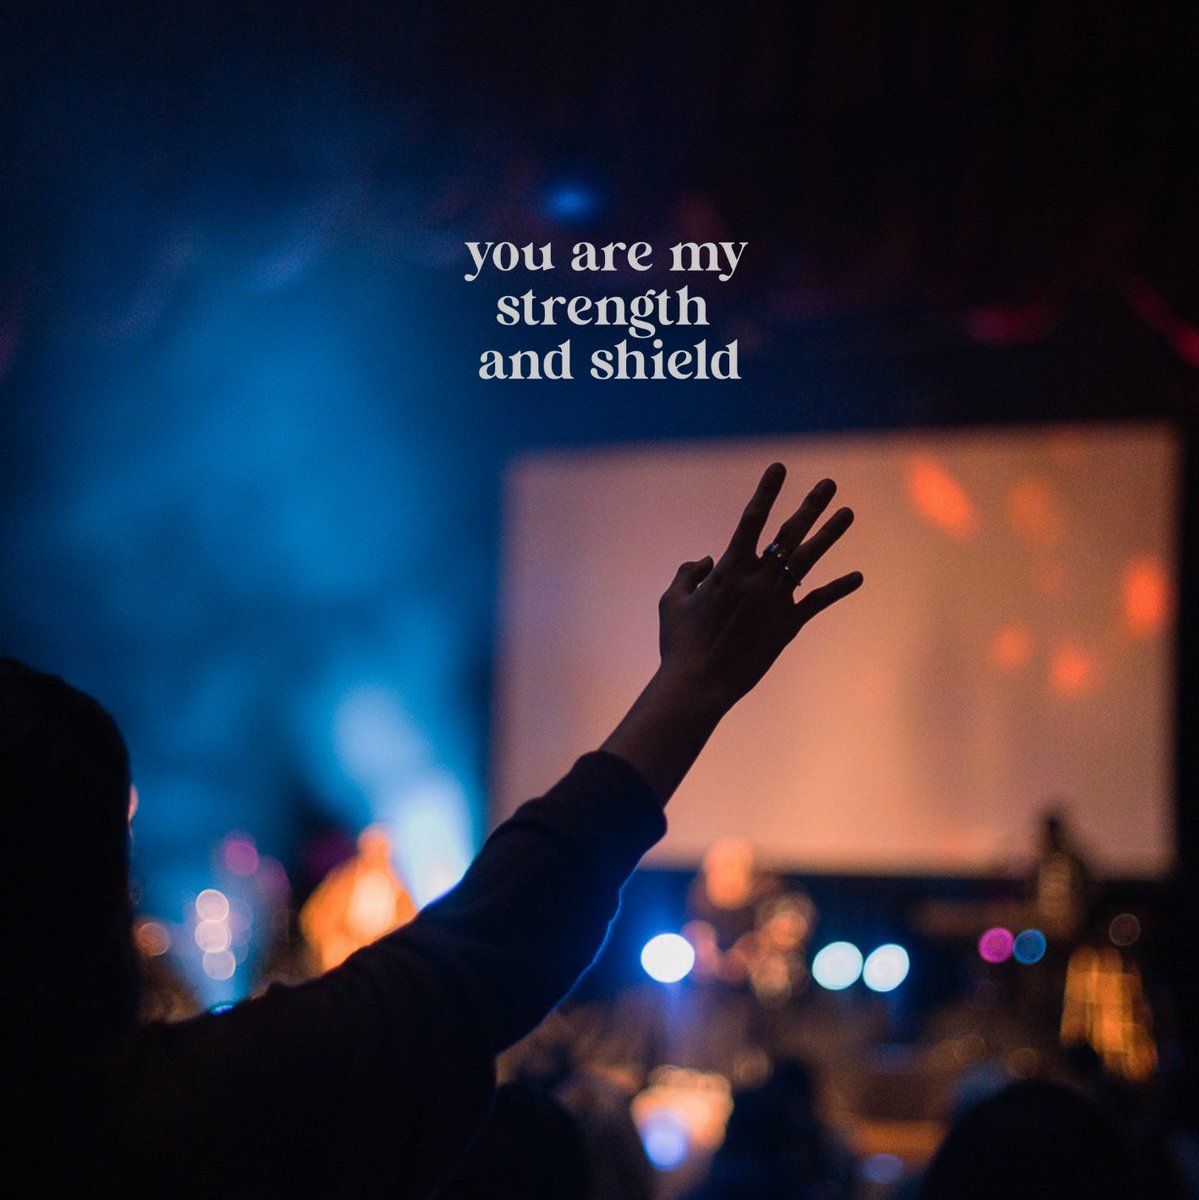 I have never walked alone I've never been abandoned You are my inheritance You are my strength and shield And I have confidence You go before me You're my deliverer I know I never walk alone